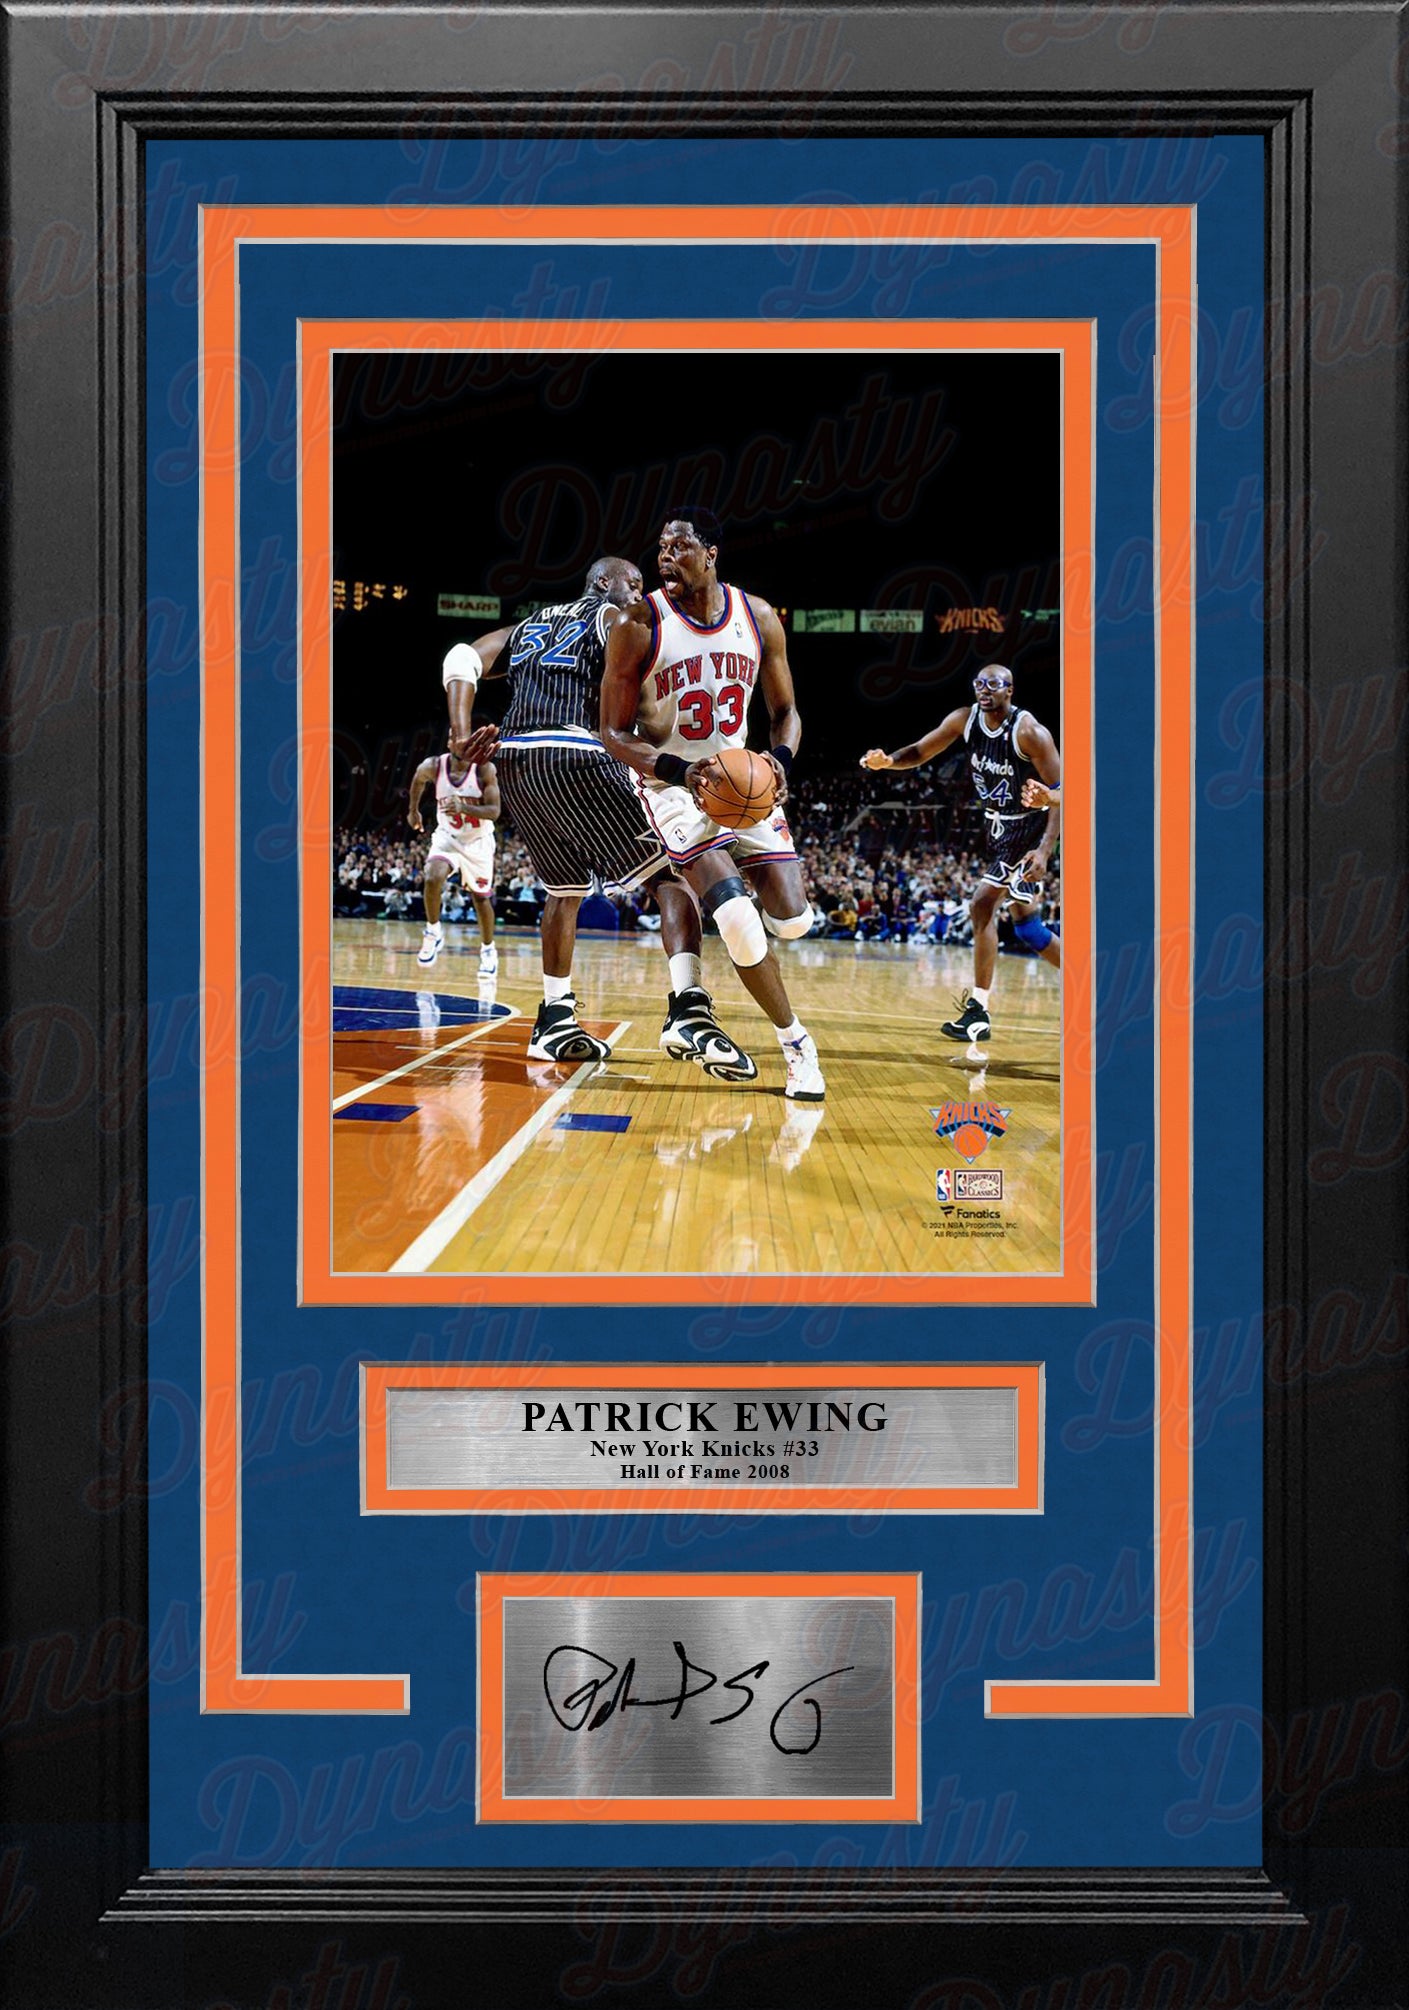 Patrick Ewing v. Shaquille O'Neal NY Knicks 8x10 Framed Basketball Photo with Engraved Autograph - Dynasty Sports & Framing 